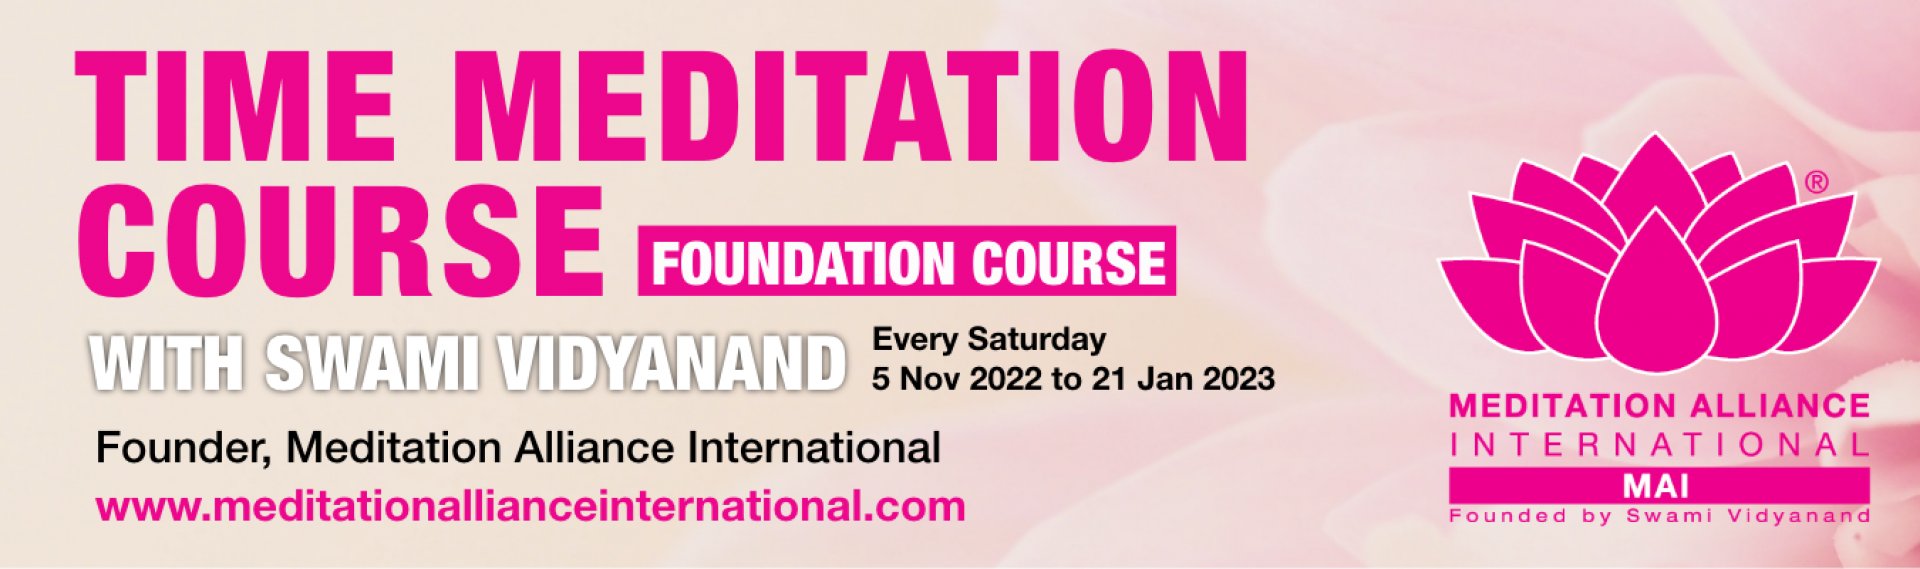 TIME MEDITATION COURSE FOUNDATION COURSE WITH SWAMI VIDYANAND WITH SWAMI VIDYANAND